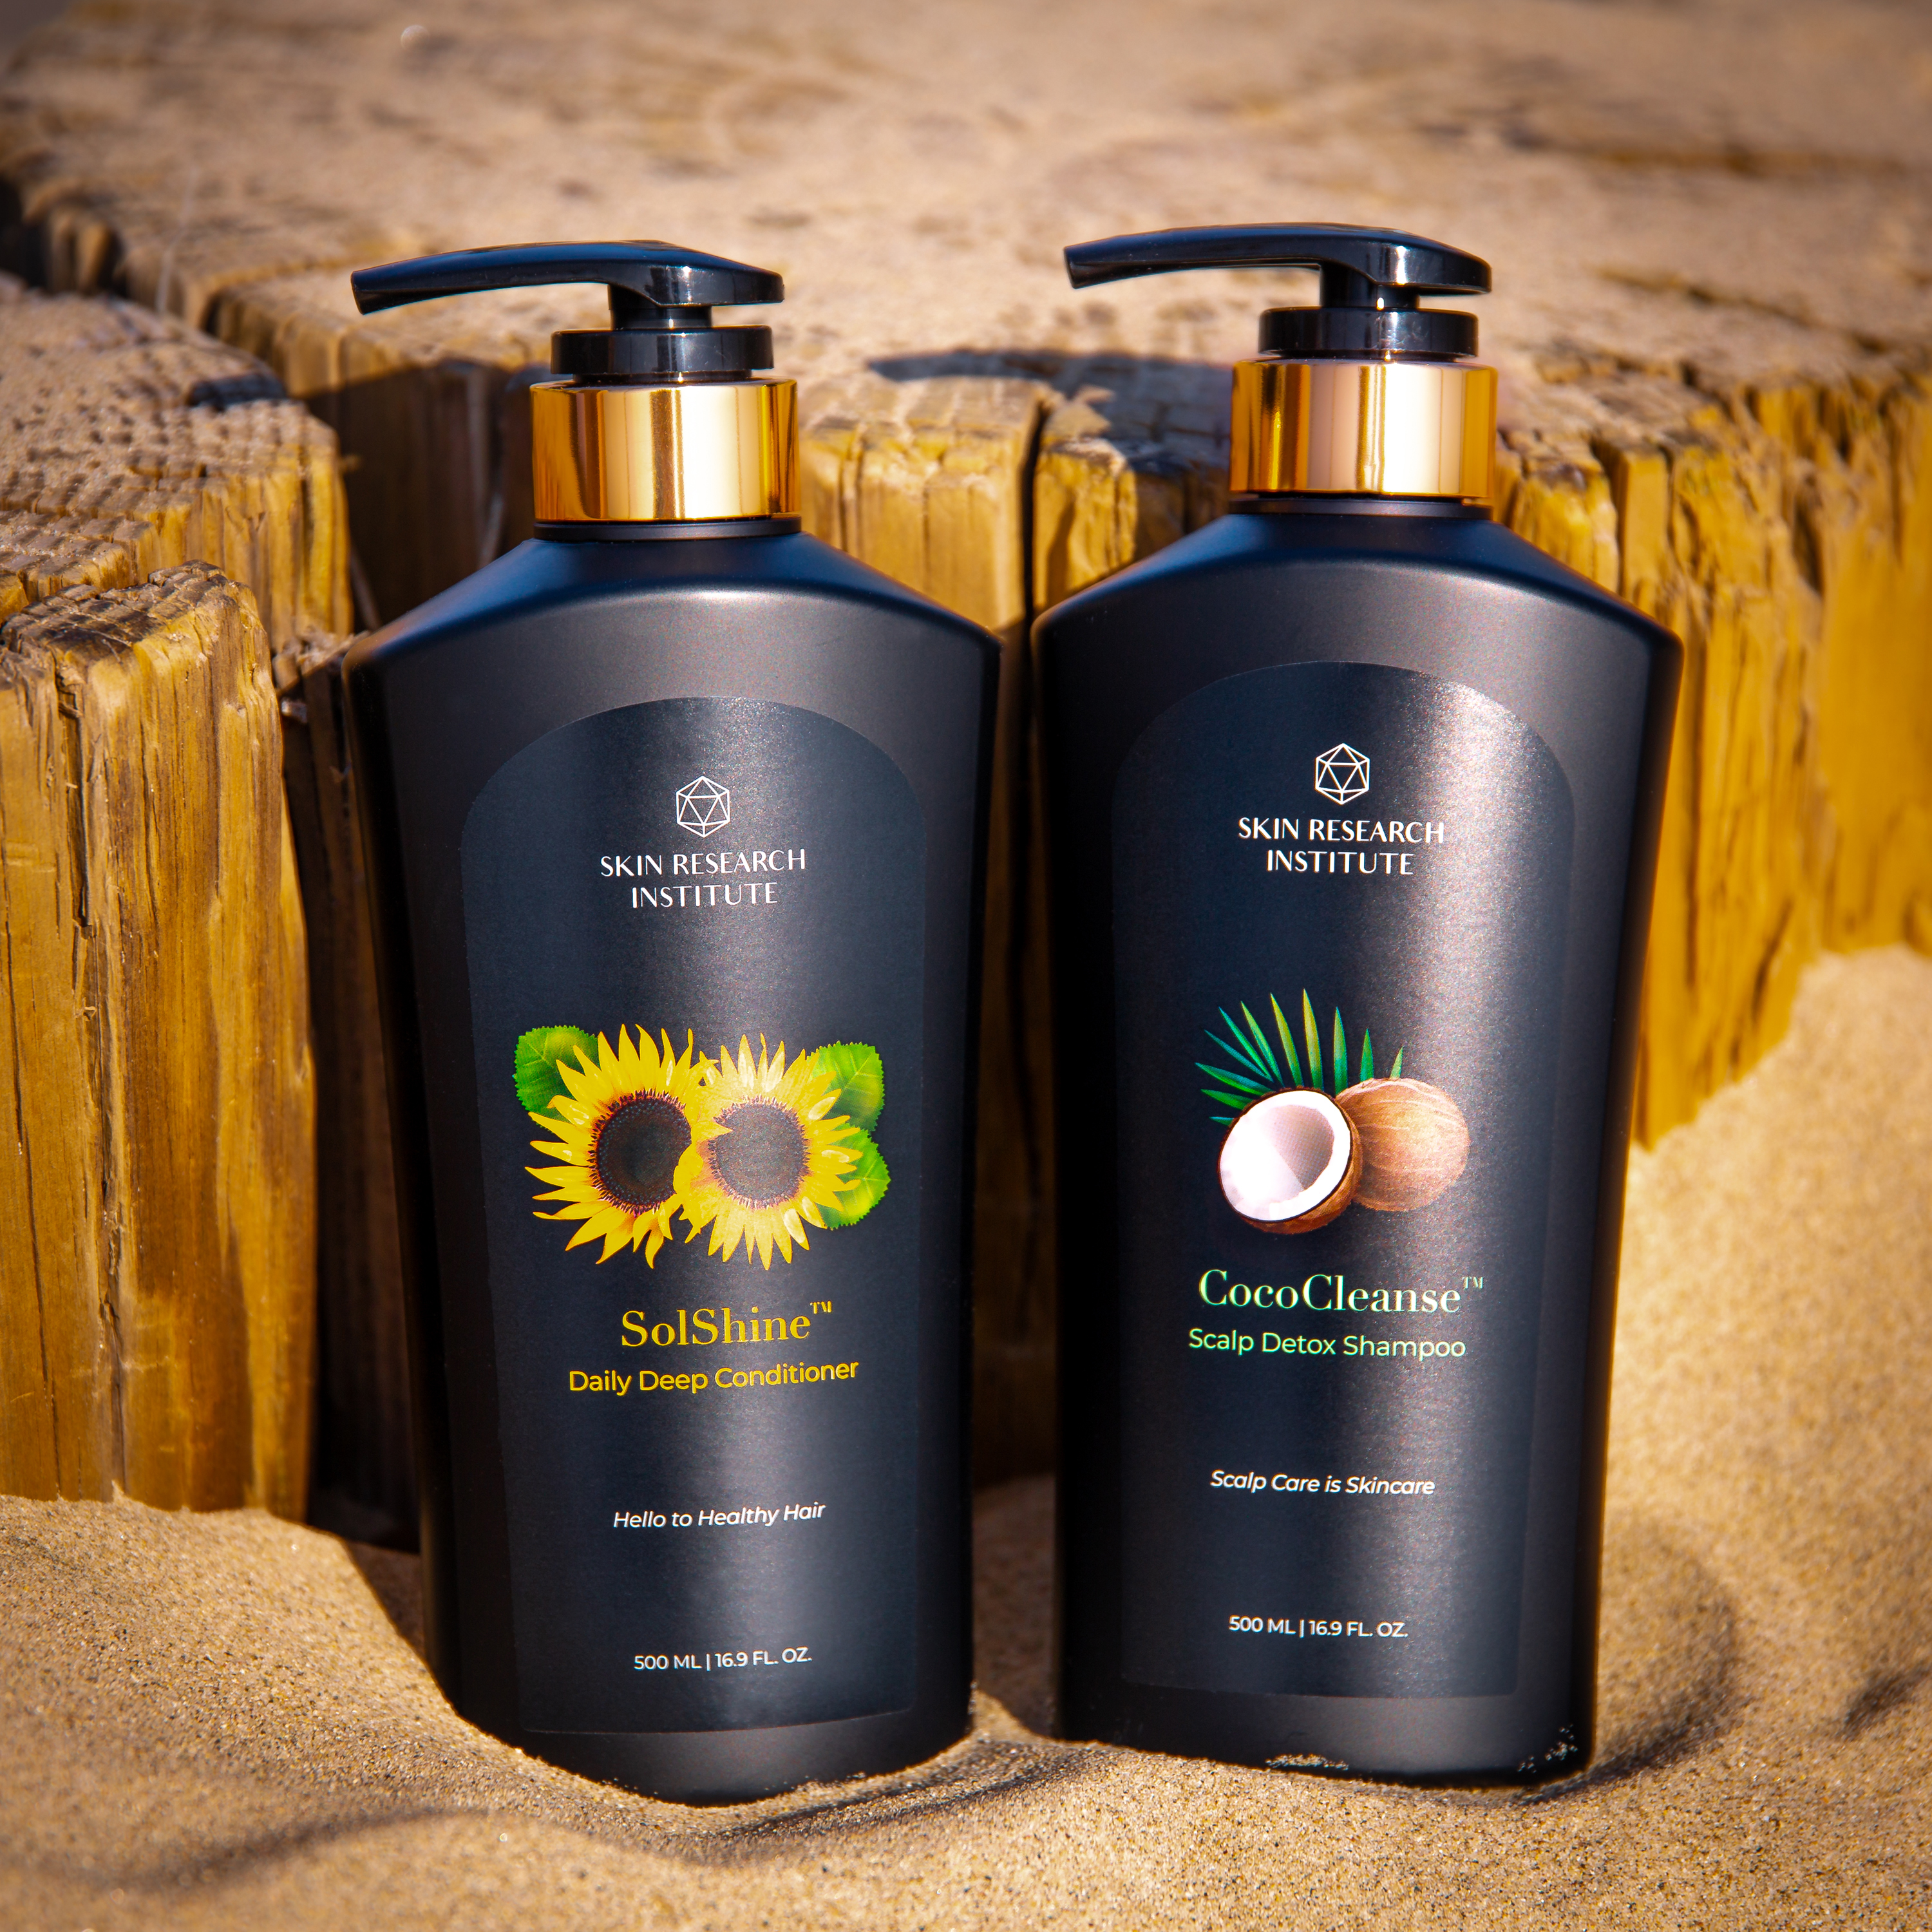 The Skin Research Institute's CocoCleanse Shampoo & SolShine Conditioner